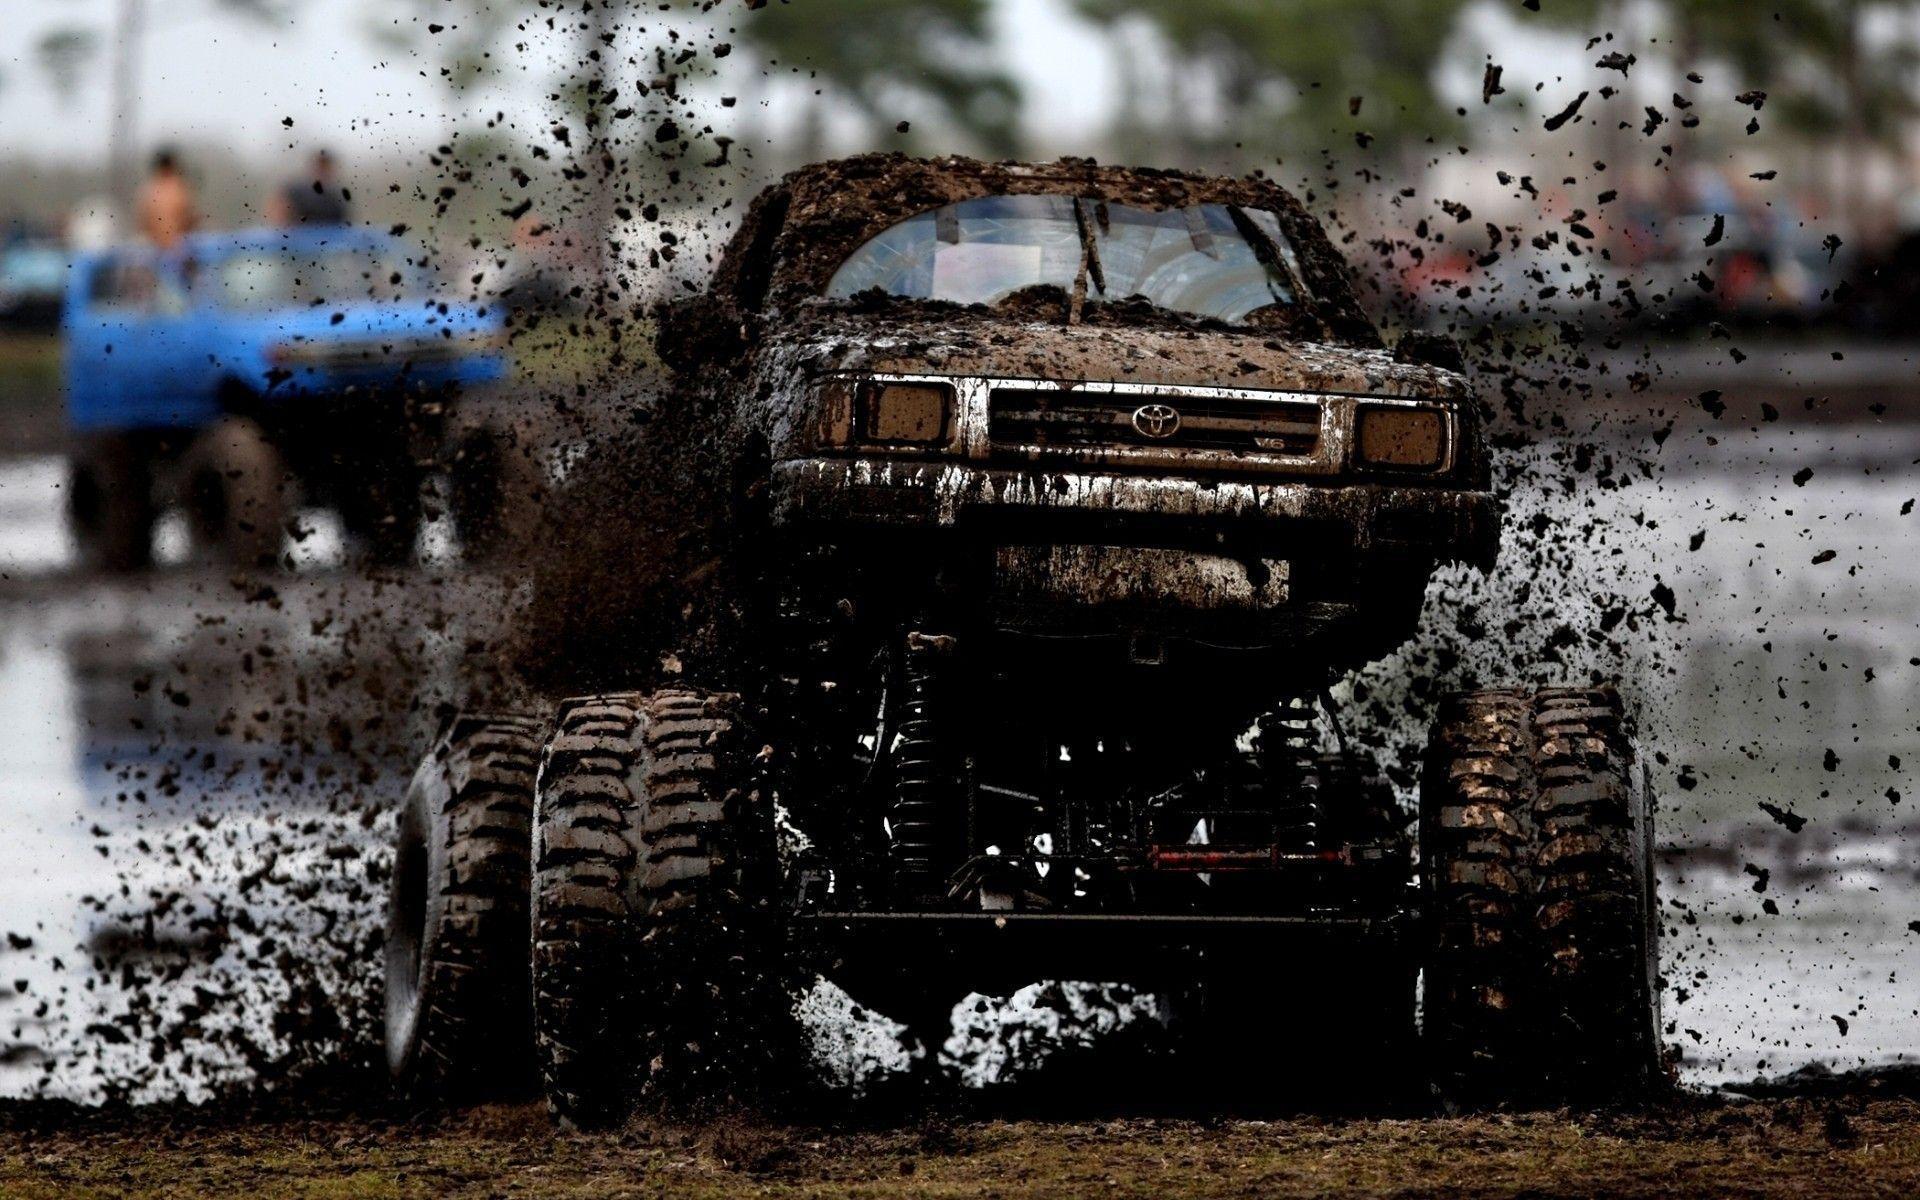 Toyota SUV covered in mud wallpaper and image